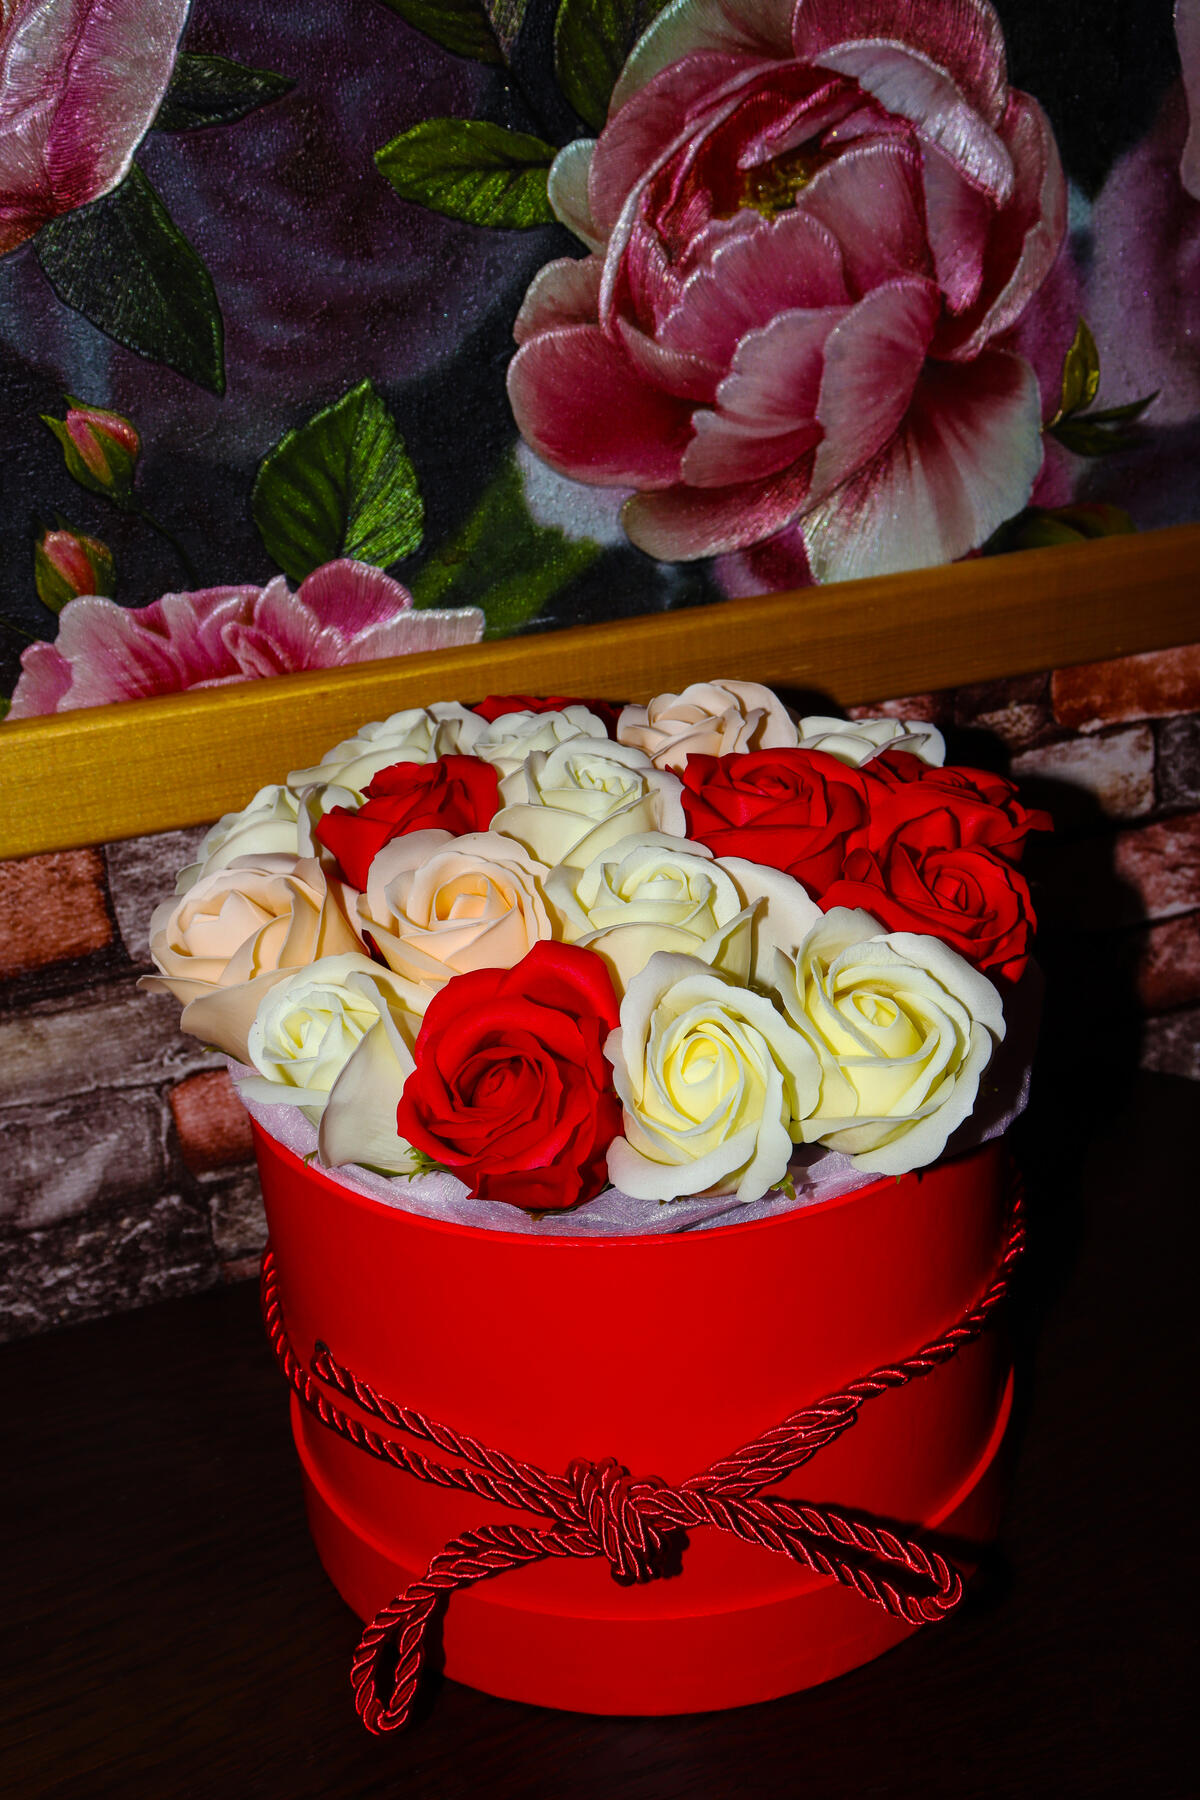 A big red box of roses